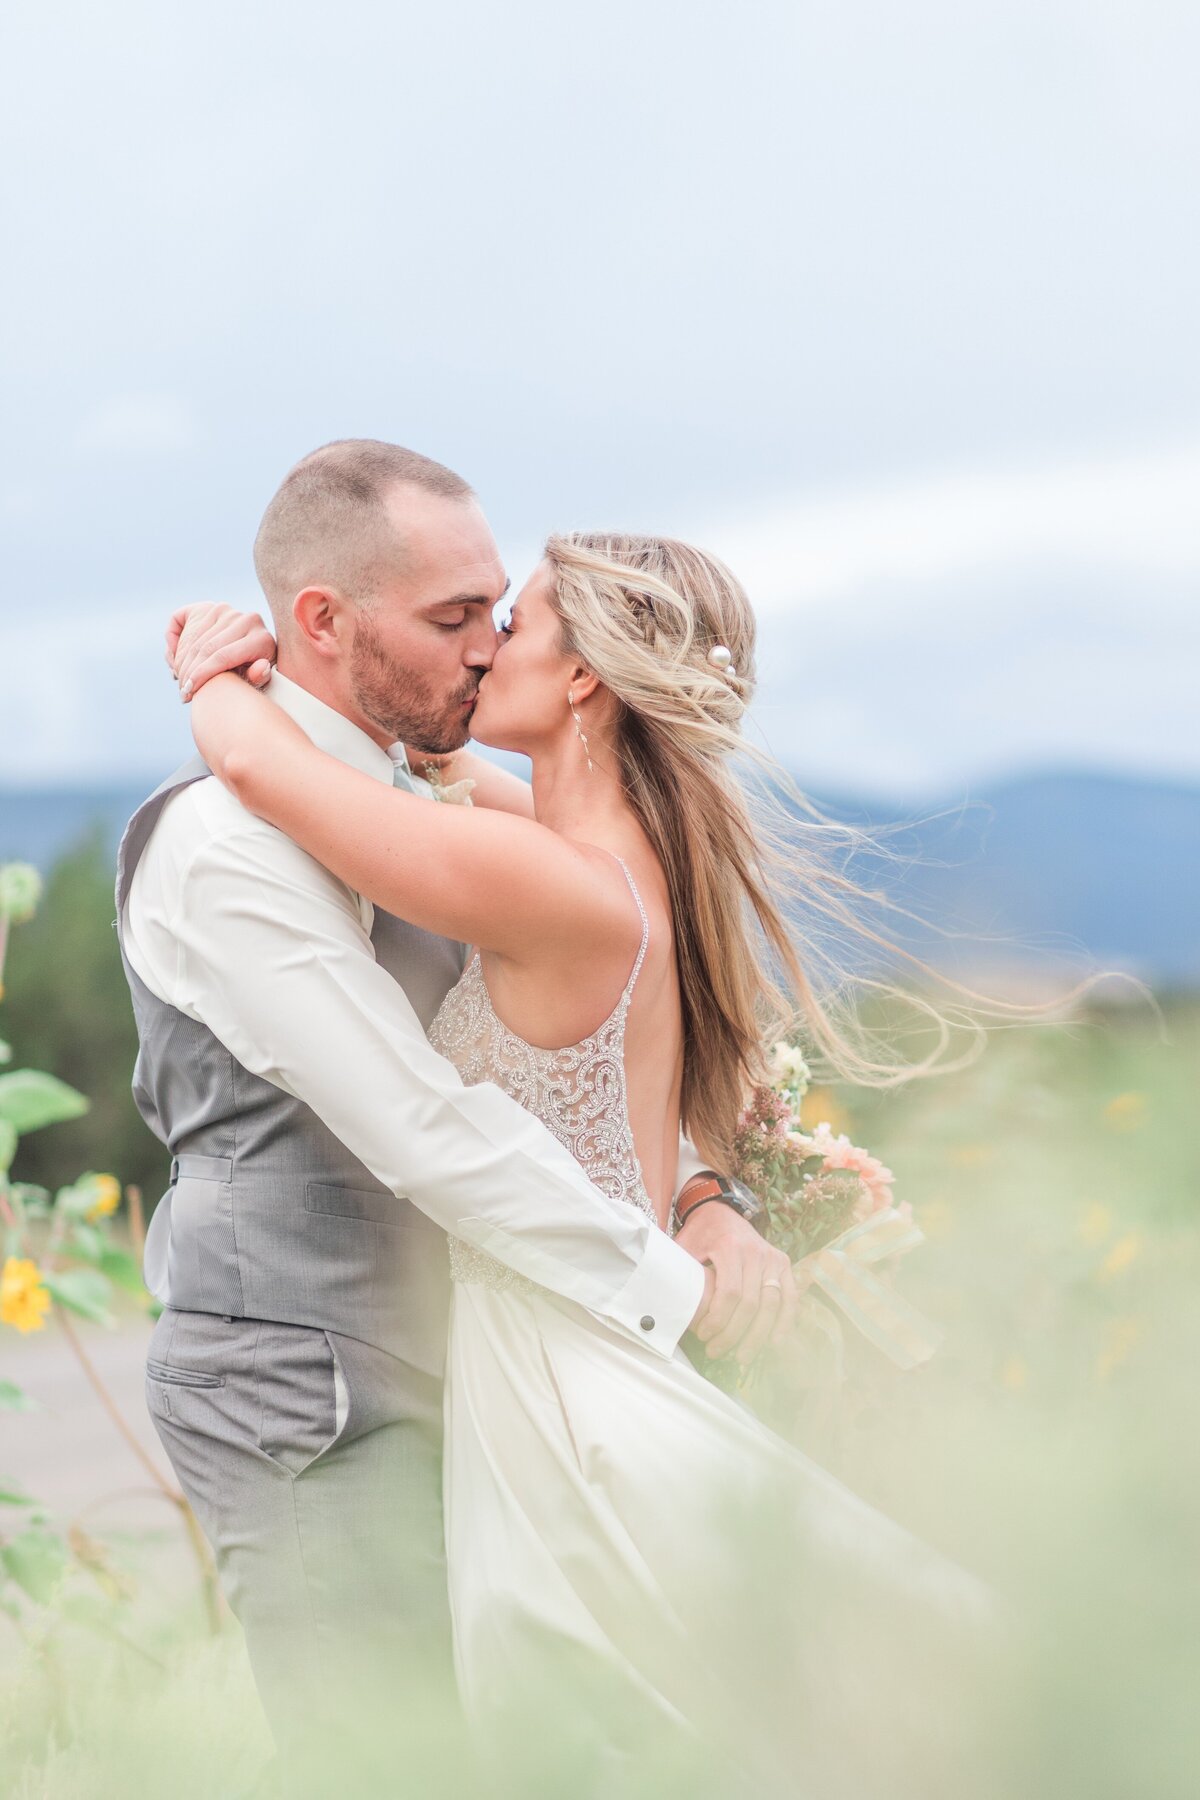 Bride and groom kiss in a field of tall grasses with mountains in the background